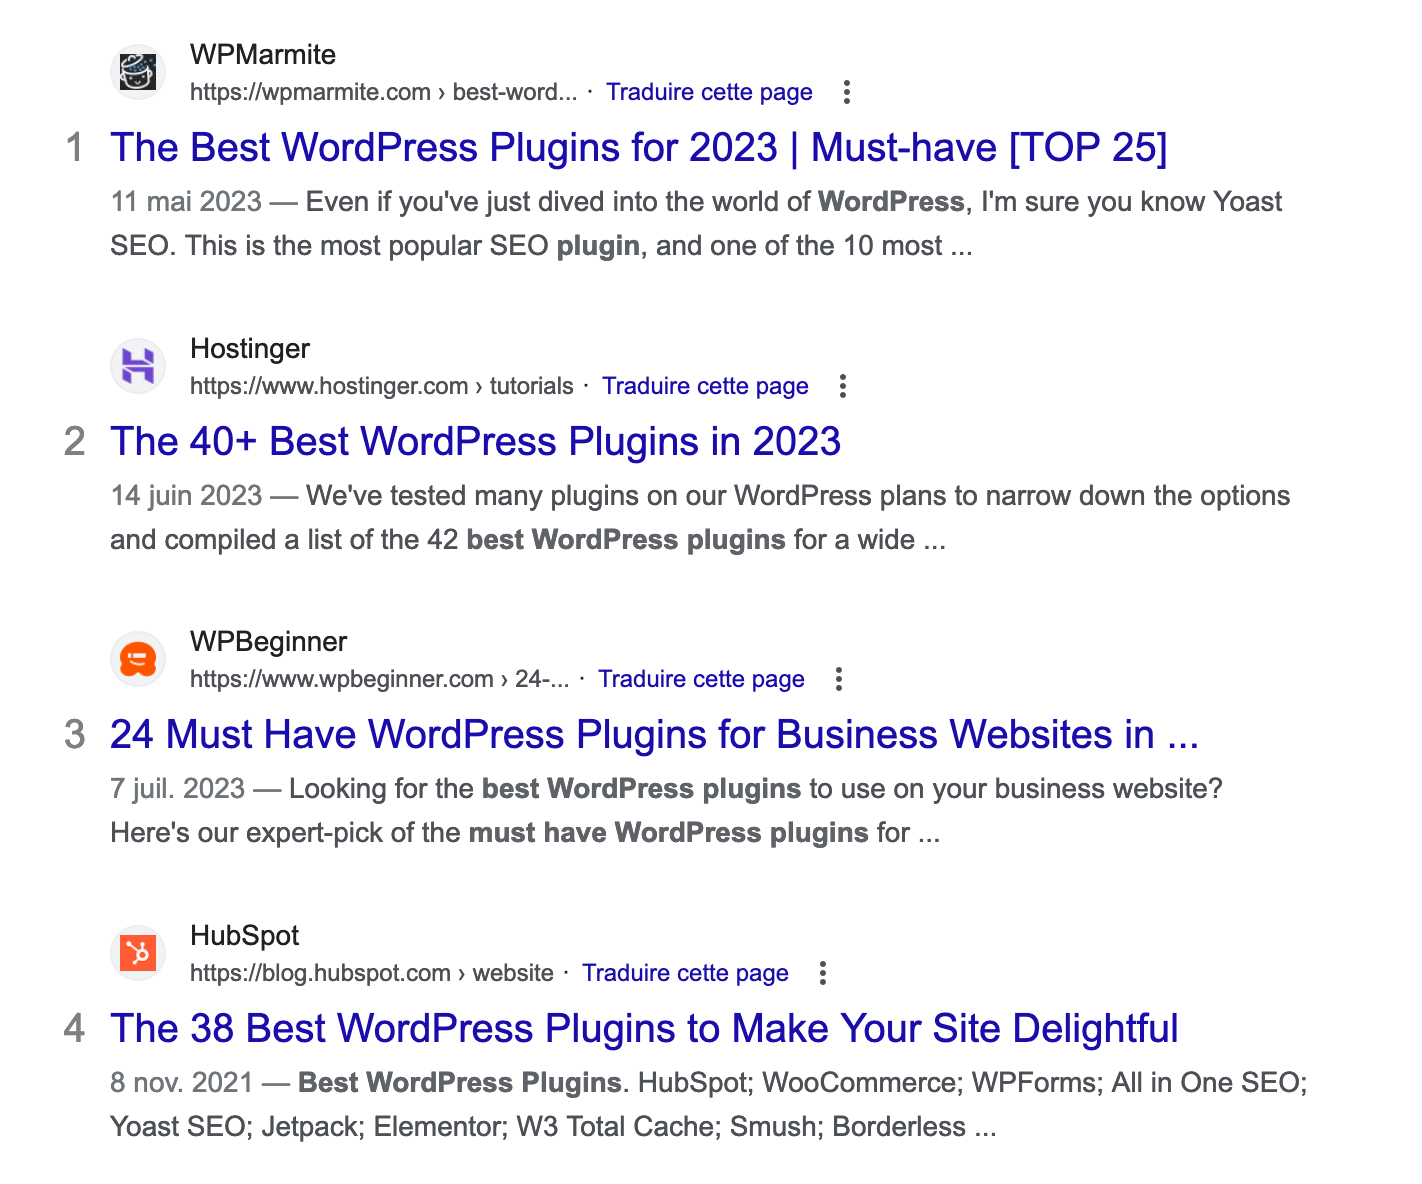 Google Search results for "WordPress plugins."